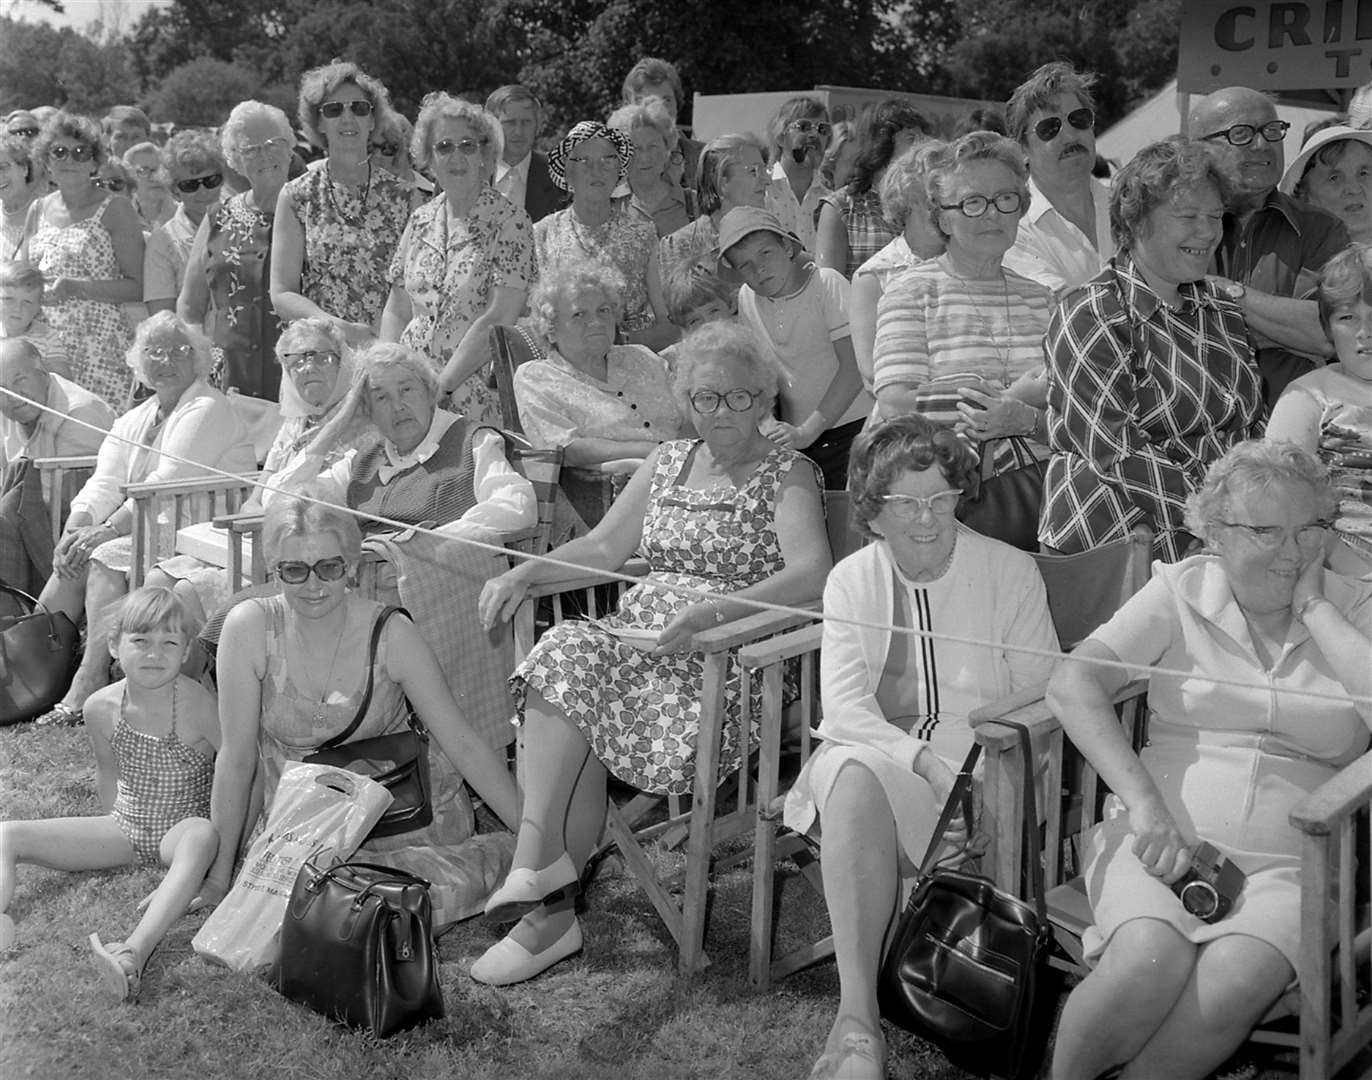 The crowd watches Jack Warner open the Herne Bay fete in 1977